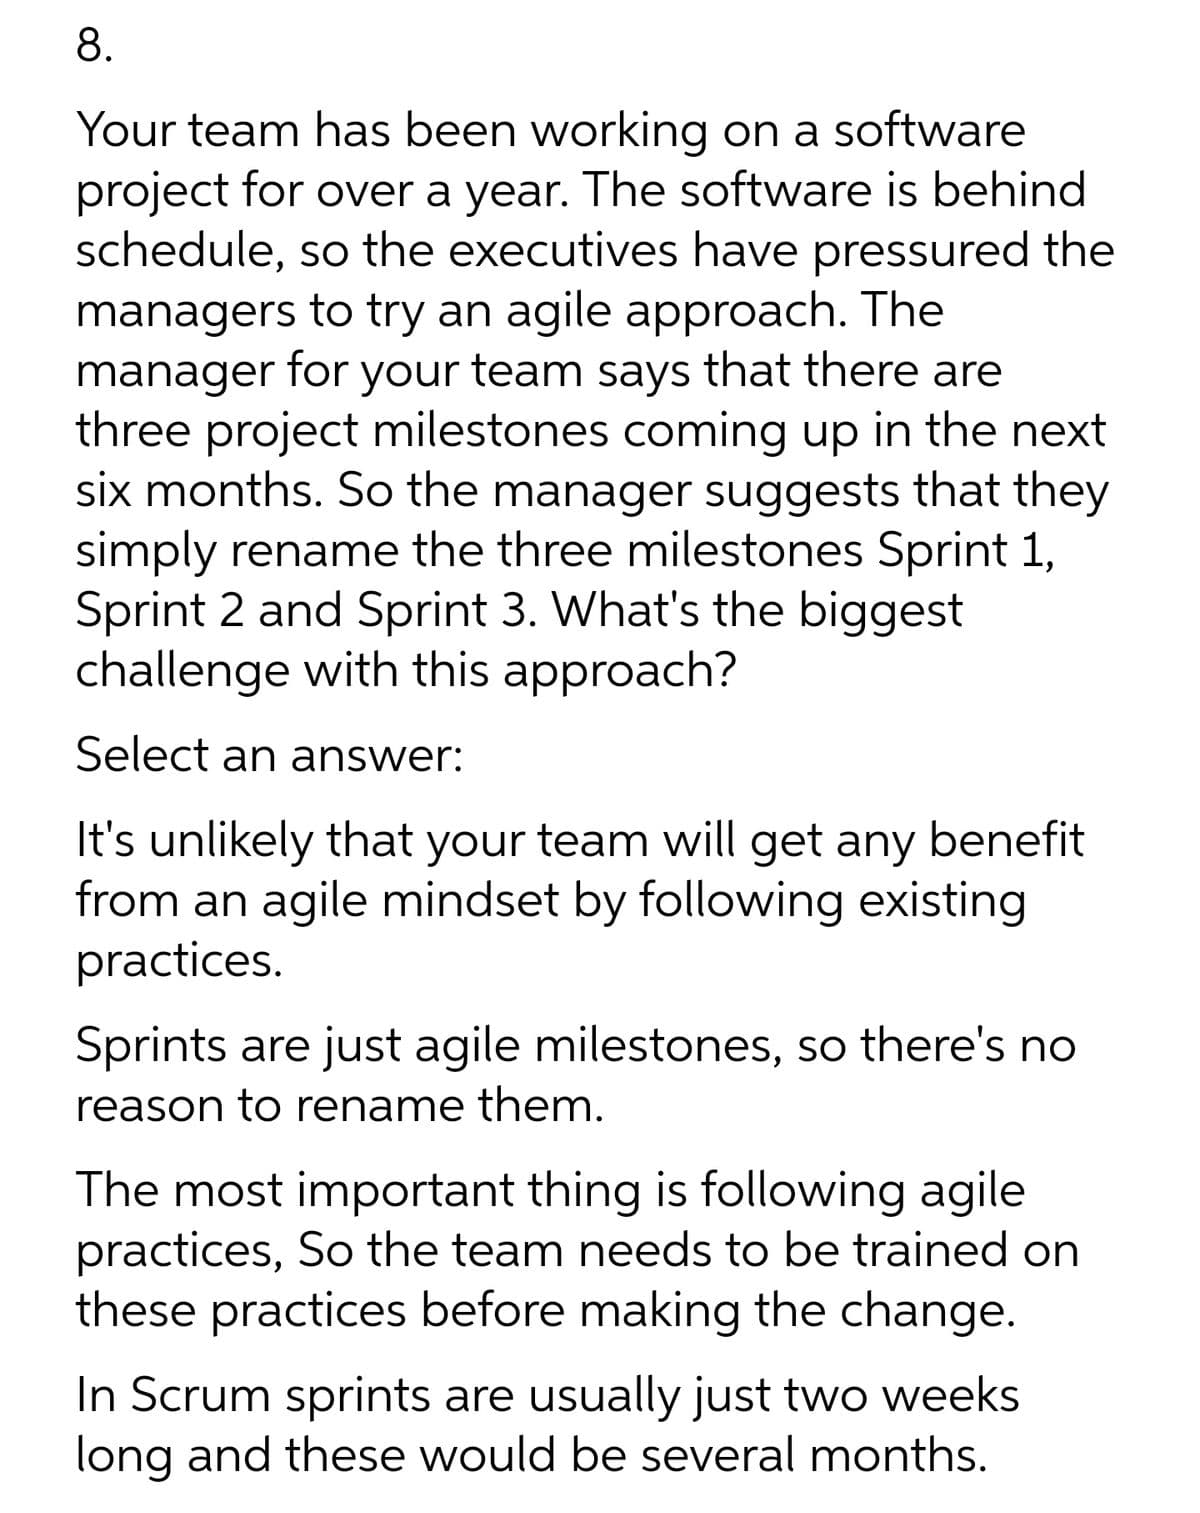 8.
Your team has been working on a software
project for over a year. The software is behind
schedule, so the executives have pressured the
managers to try an agile approach. The
manager for your team says that there are
three project milestones coming up in the next
six months. So the manager suggests that they
simply rename the three milestones Sprint 1,
Sprint 2 and Sprint 3. What's the biggest
challenge with this approach?
Select an answer:
It's unlikely that your team will get any benefit
from an agile mindset by following existing
practices.
Sprints are just agile milestones, so there's no
reason to rename them.
The most important thing is following agile
practices, So the team needs to be trained on
these practices before making the change.
In Scrum sprints are usually just two weeks
long and these would be several months.
